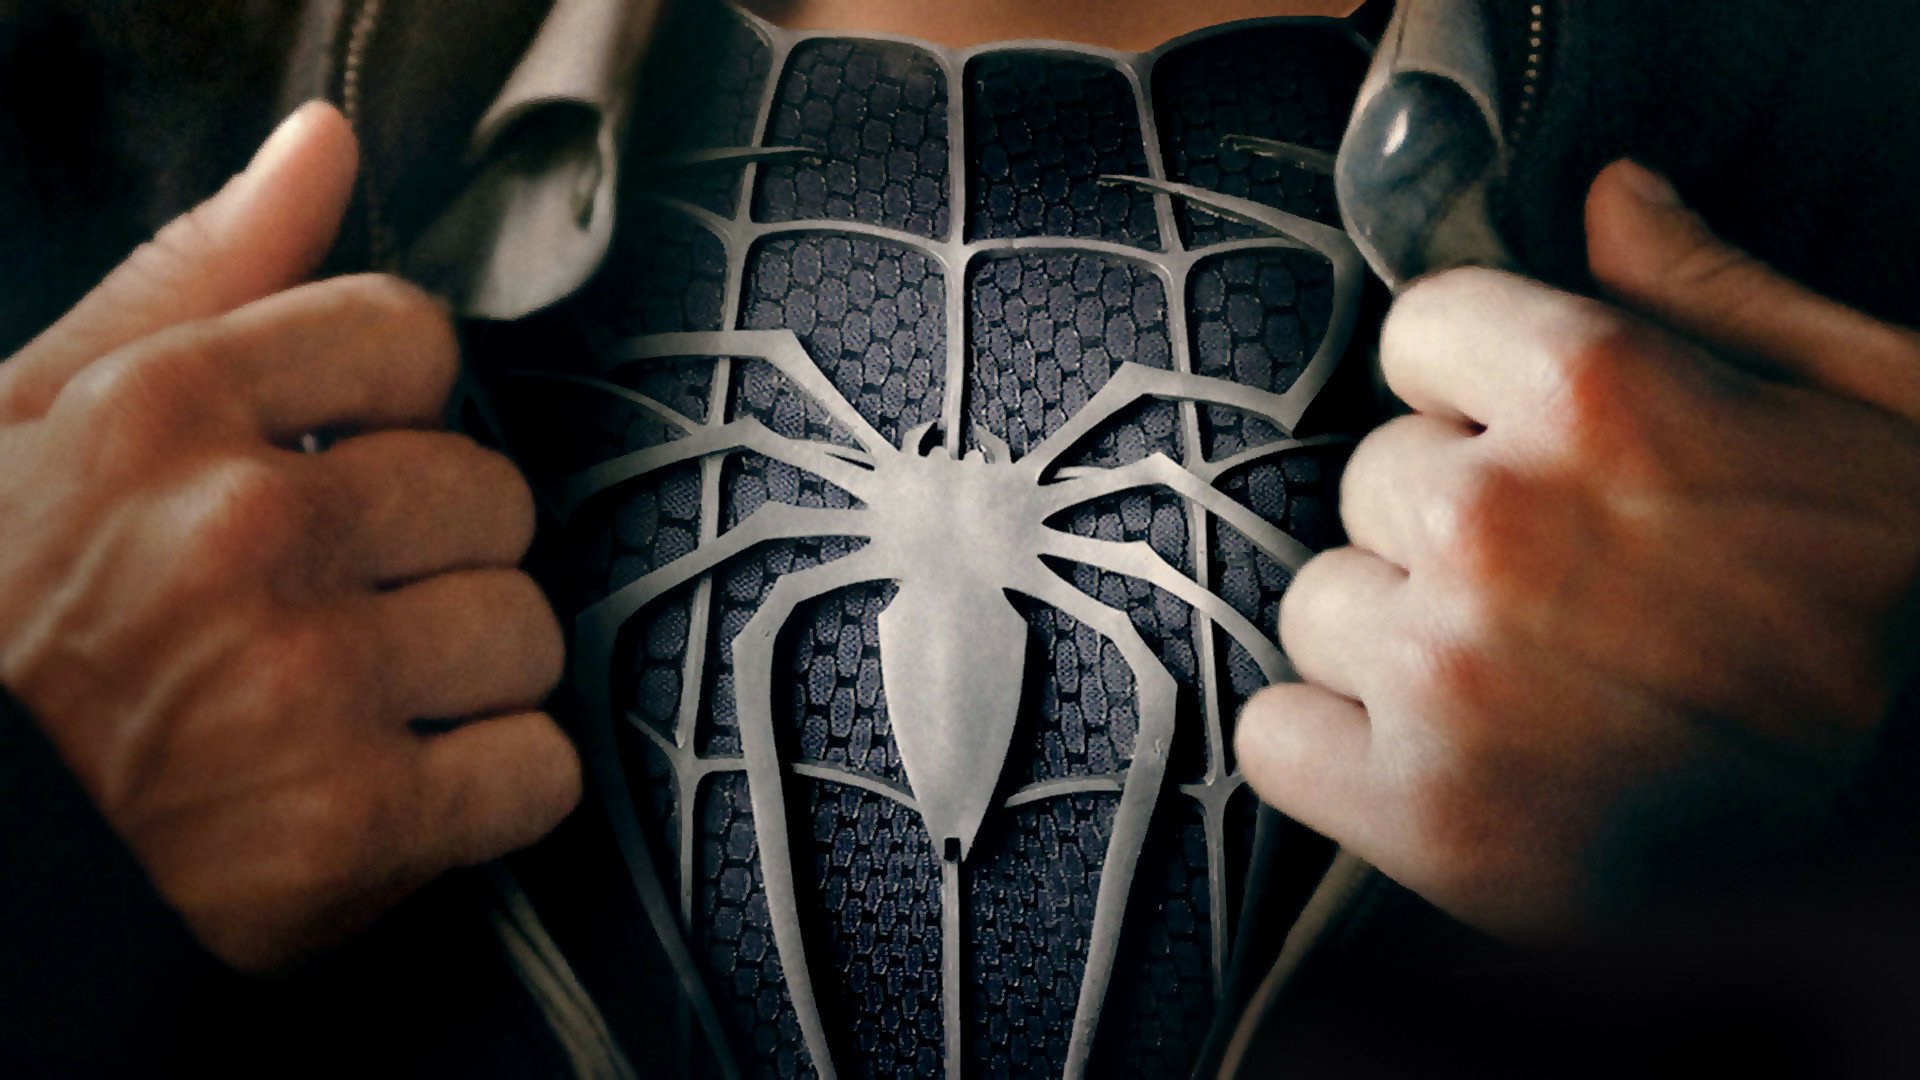 Spider-Man 3 download the new for mac